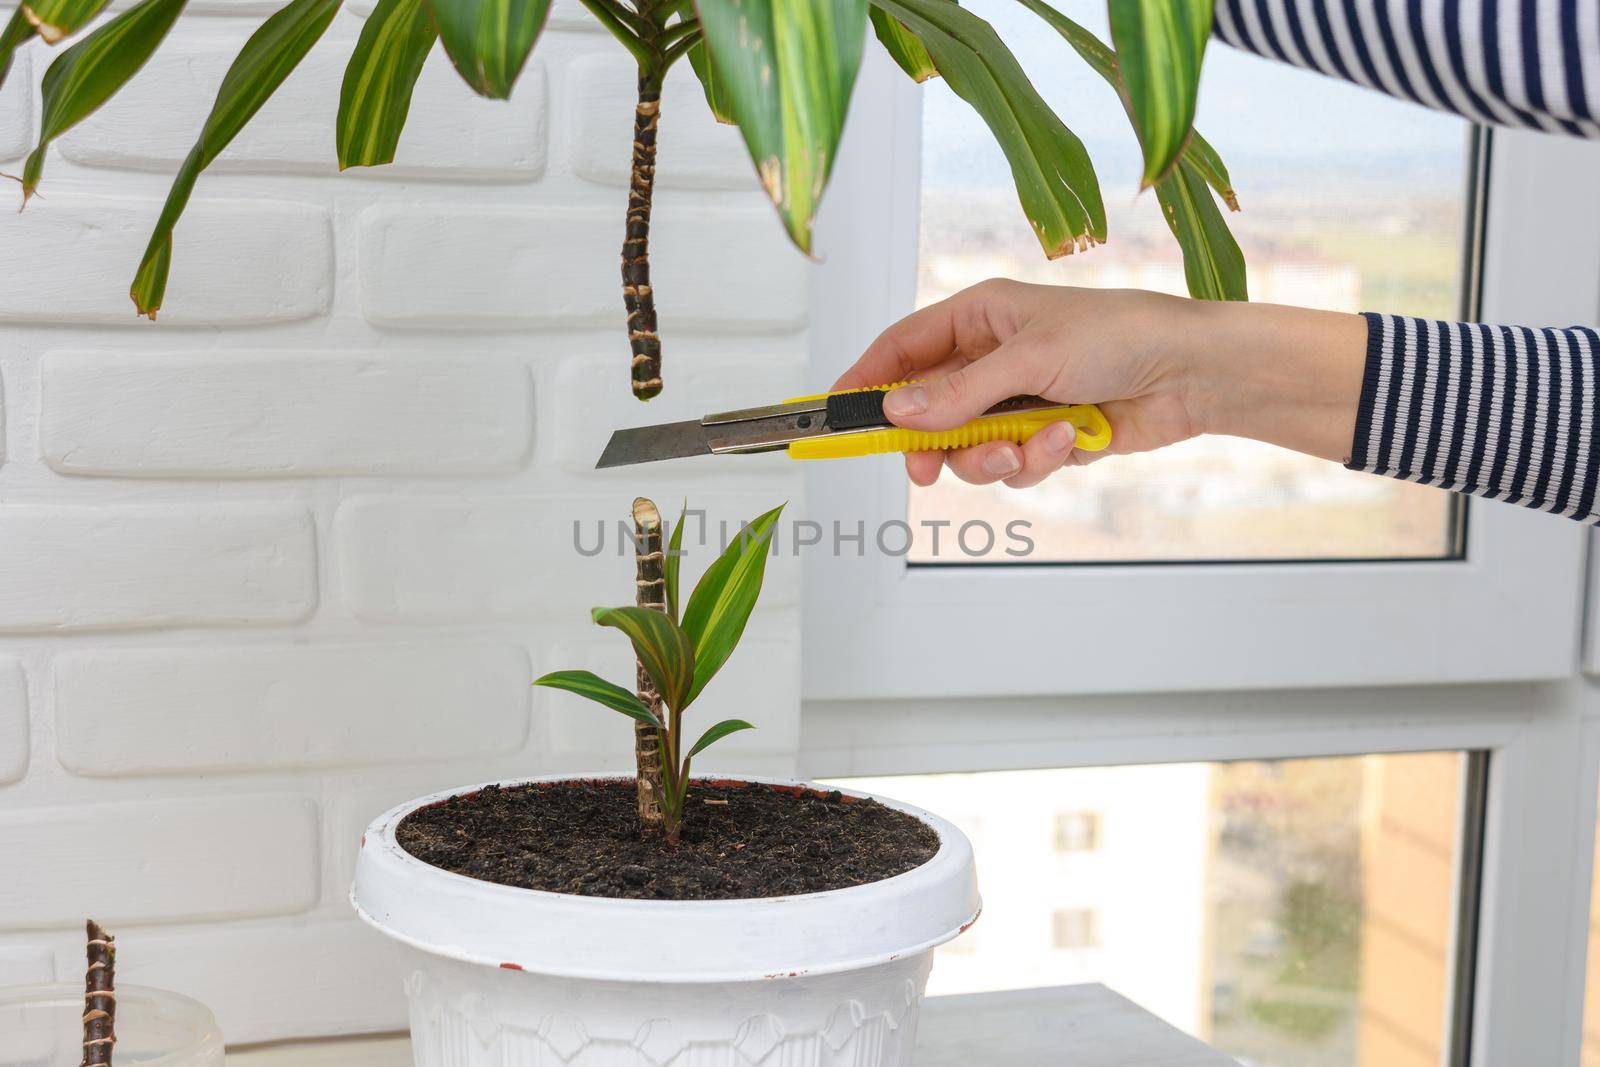 Cutting indoor plants, the girl's hands cut off the upper part of the cordilina plant